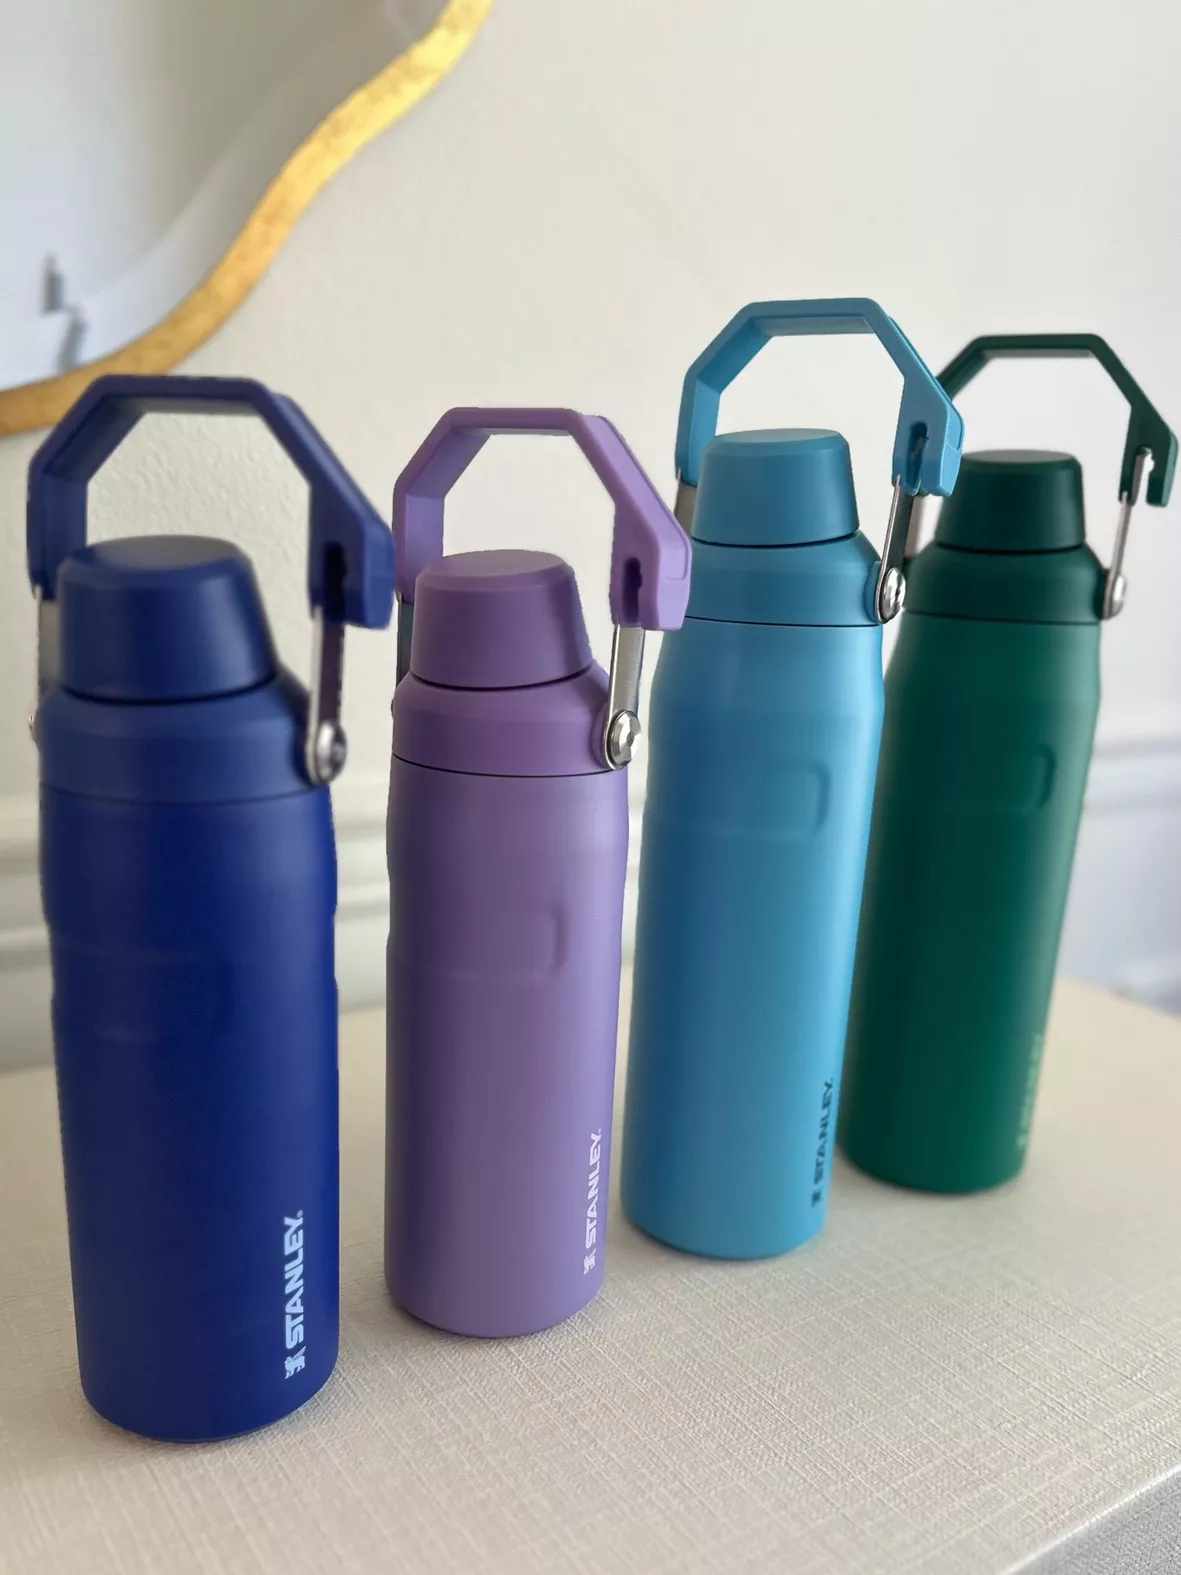 IceFlow Bottle with Fast Flow Lid